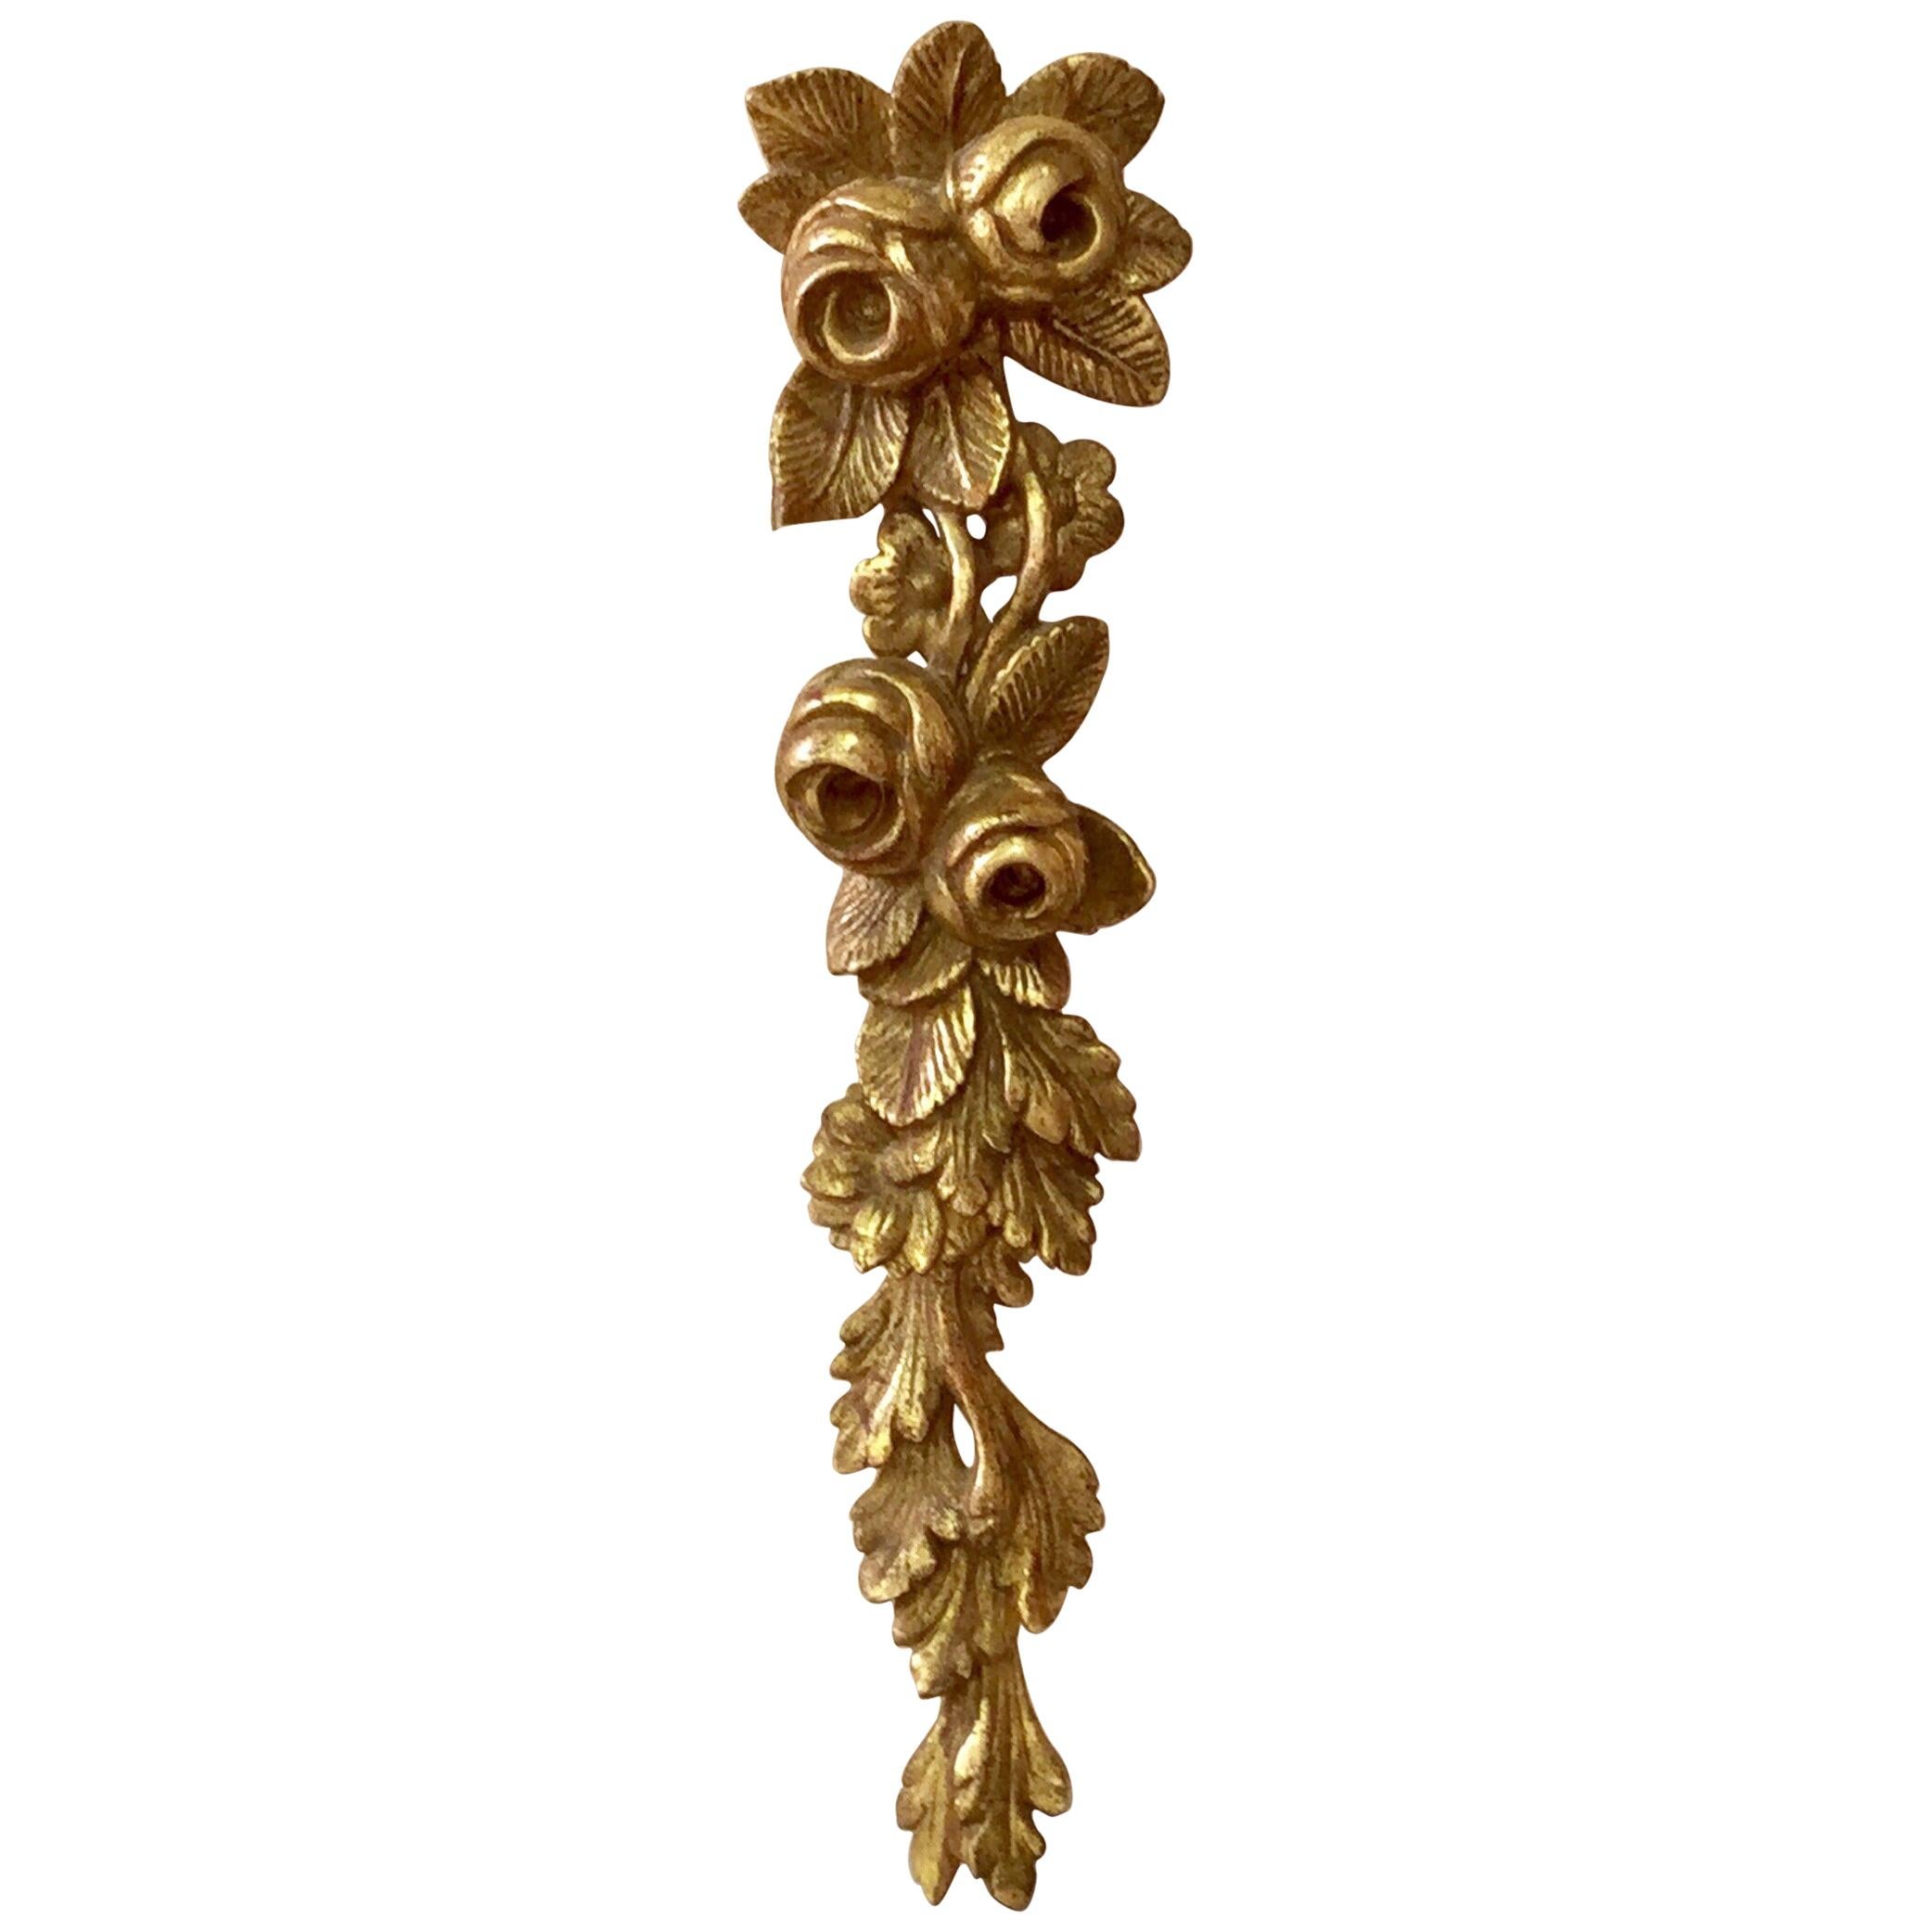 Architectural Gilded Wood Roses Garland, circa 1930